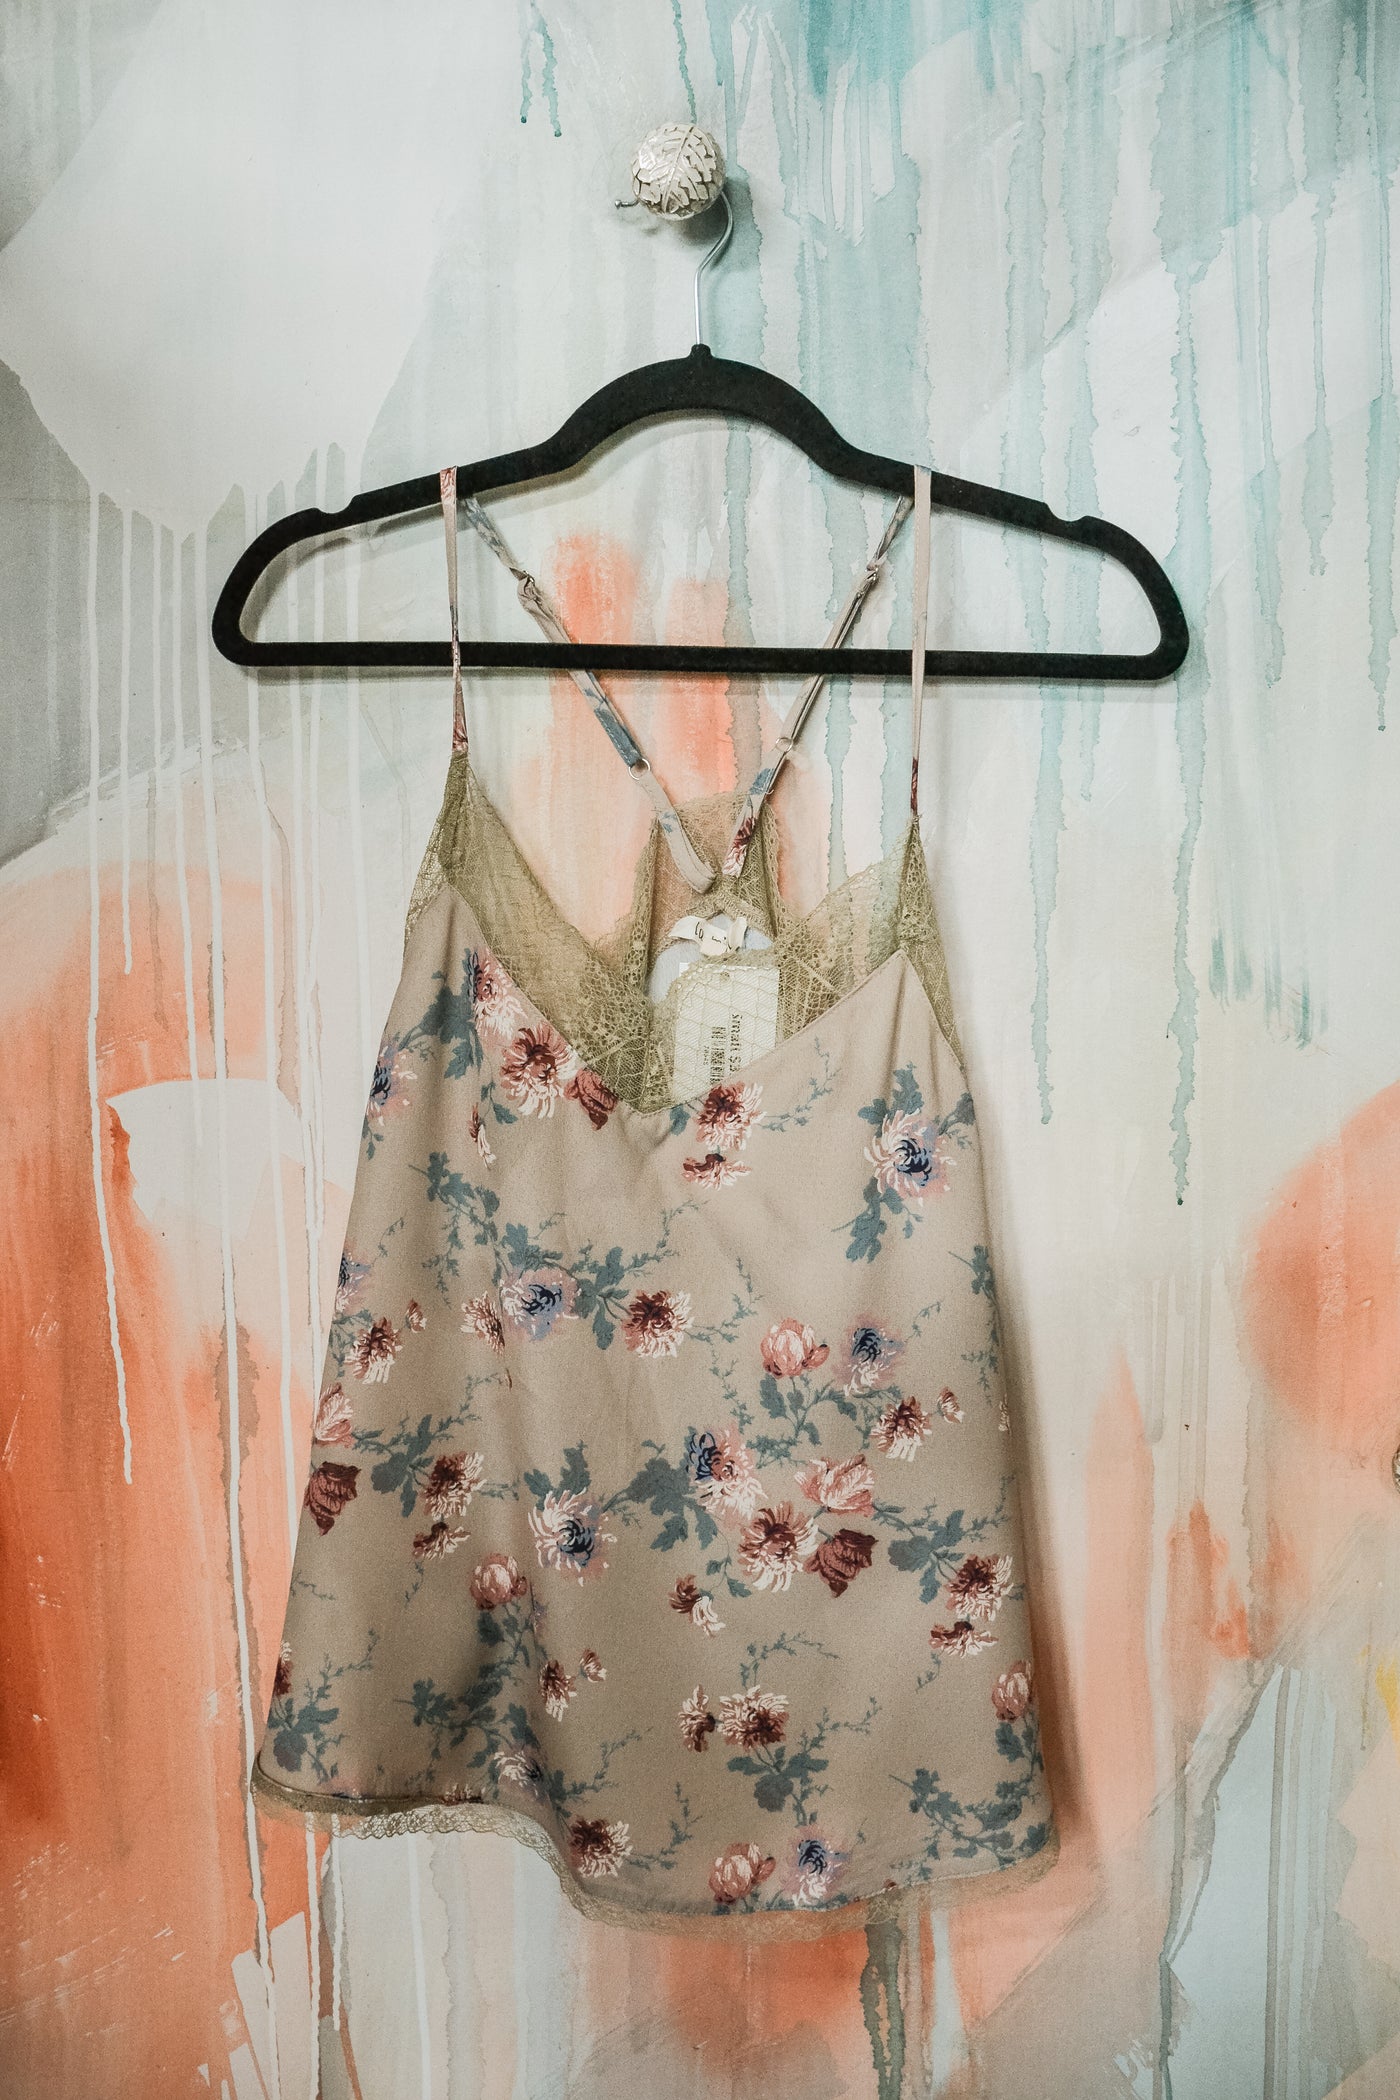 Lace Neck Floral Tank - Adorn Boutique in Mitchell